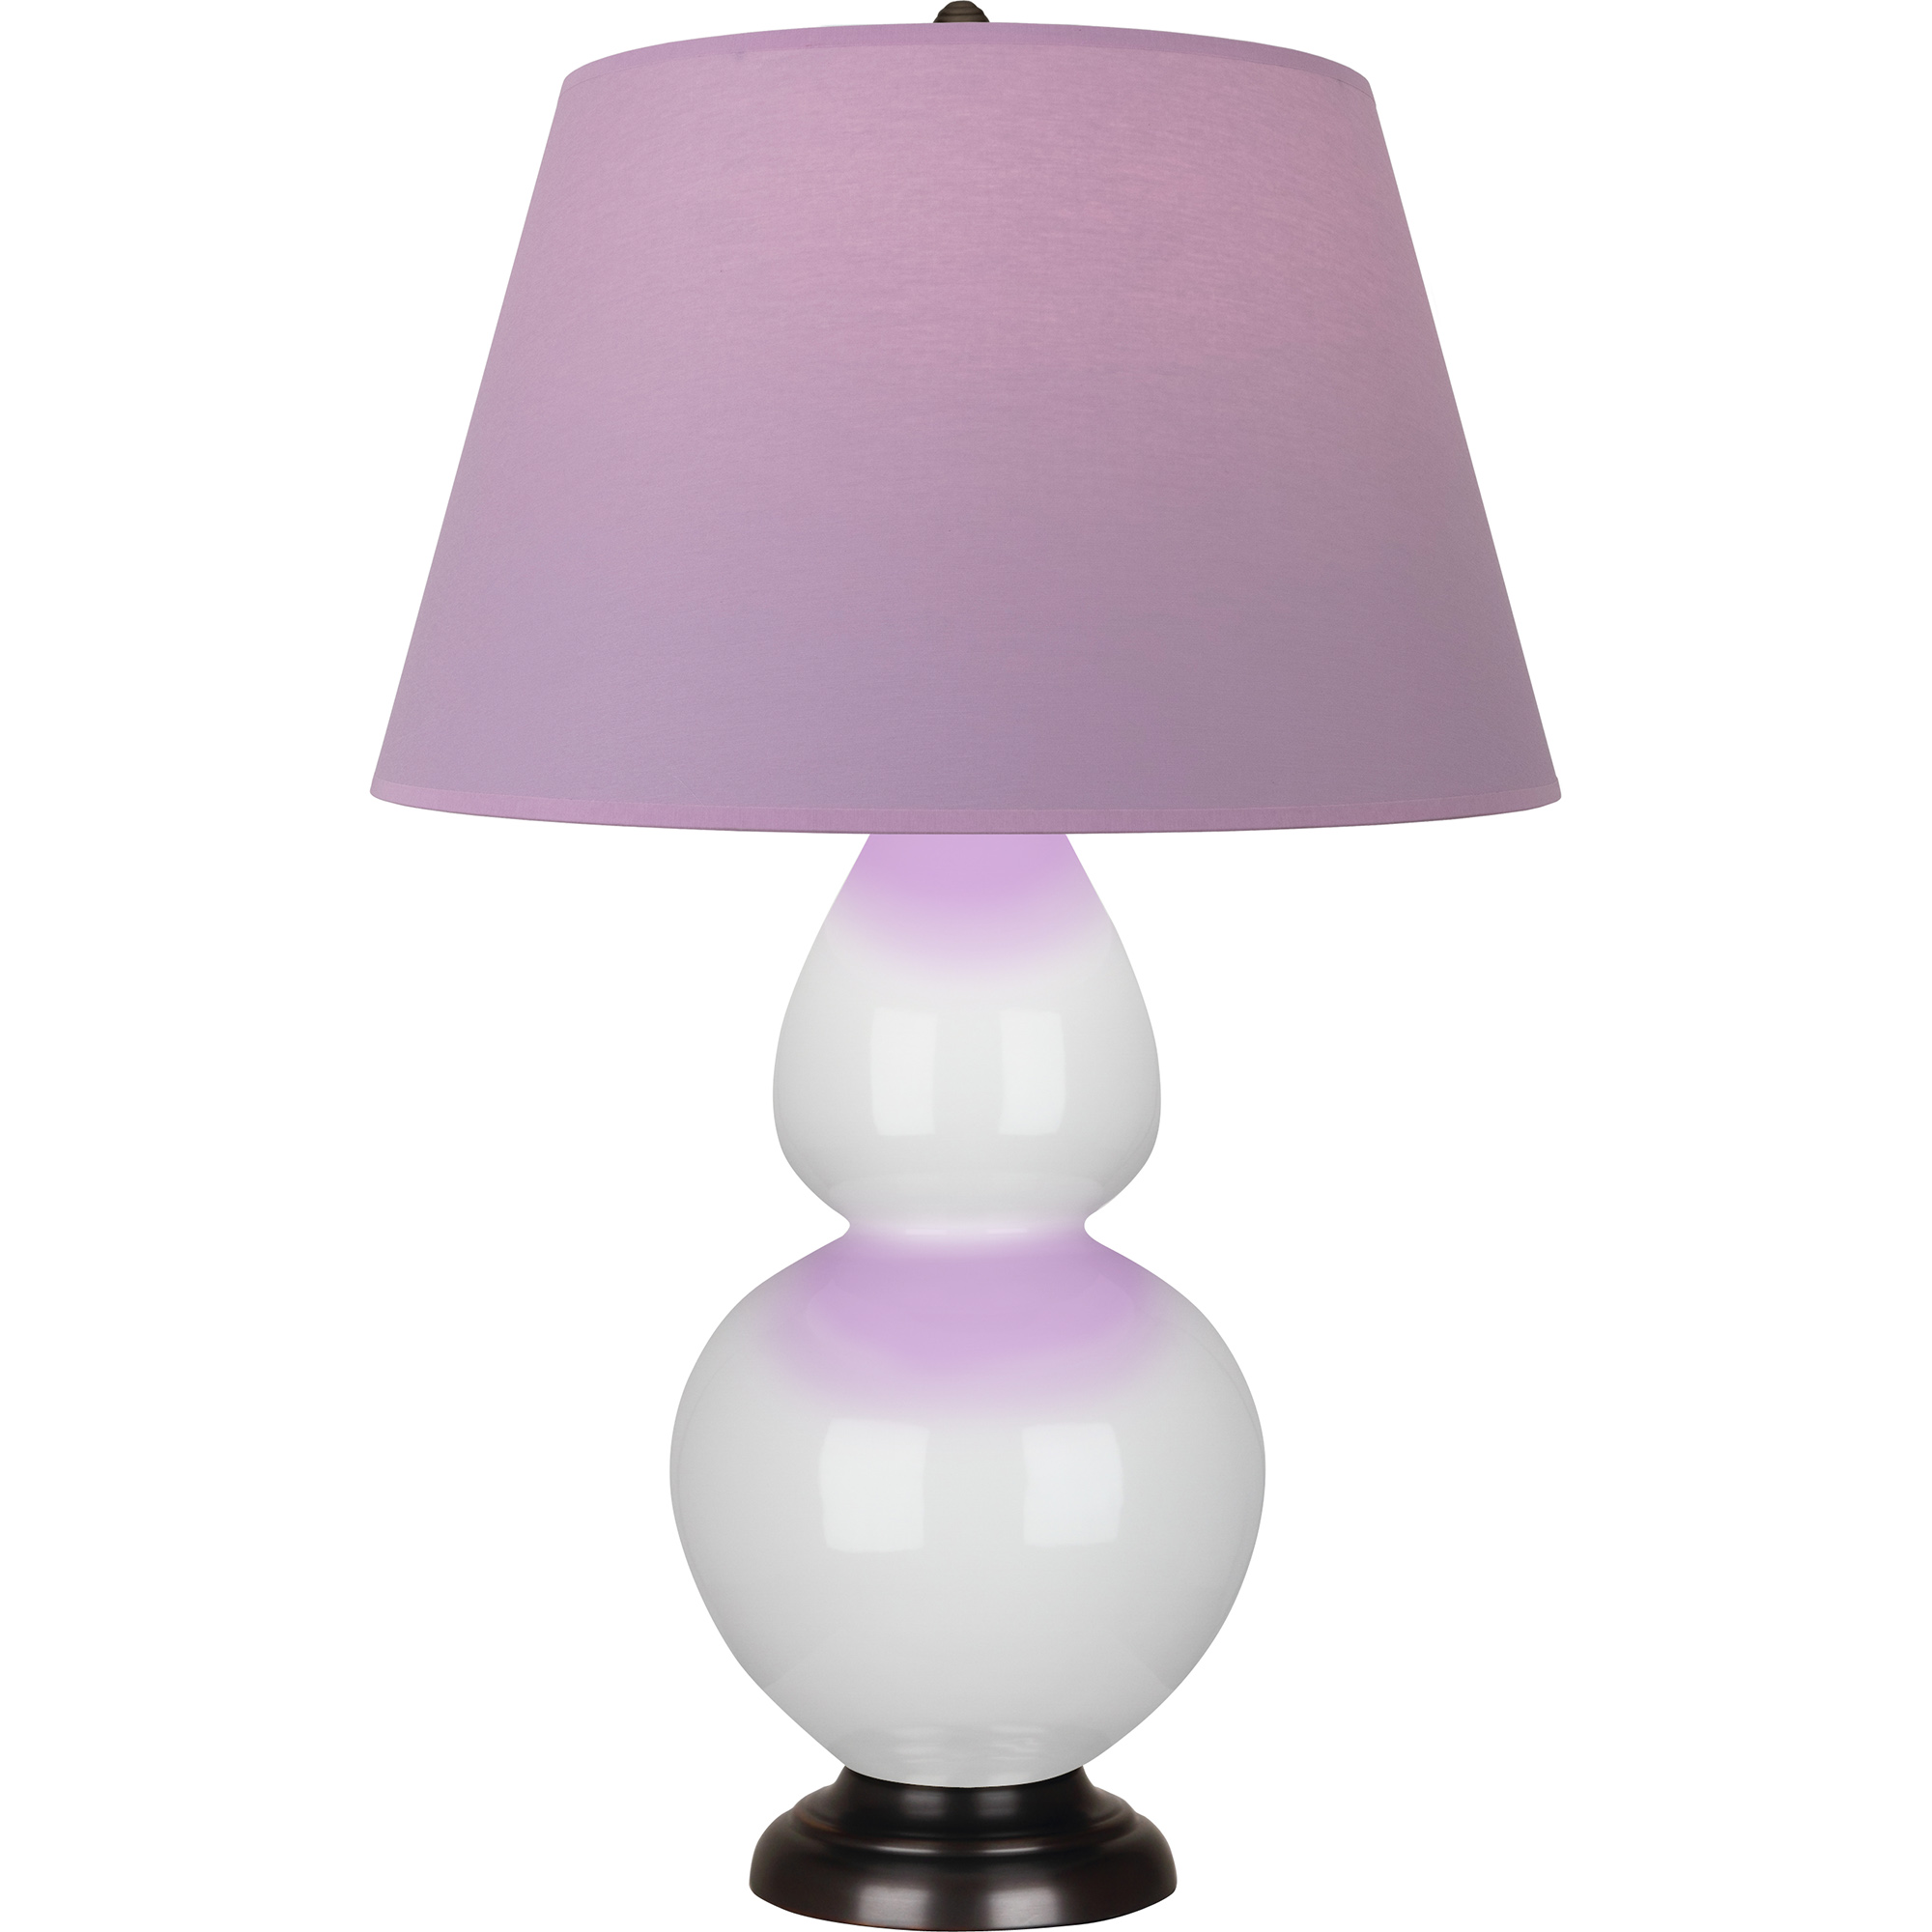 Double Gourd Table Lamp Style #1640L